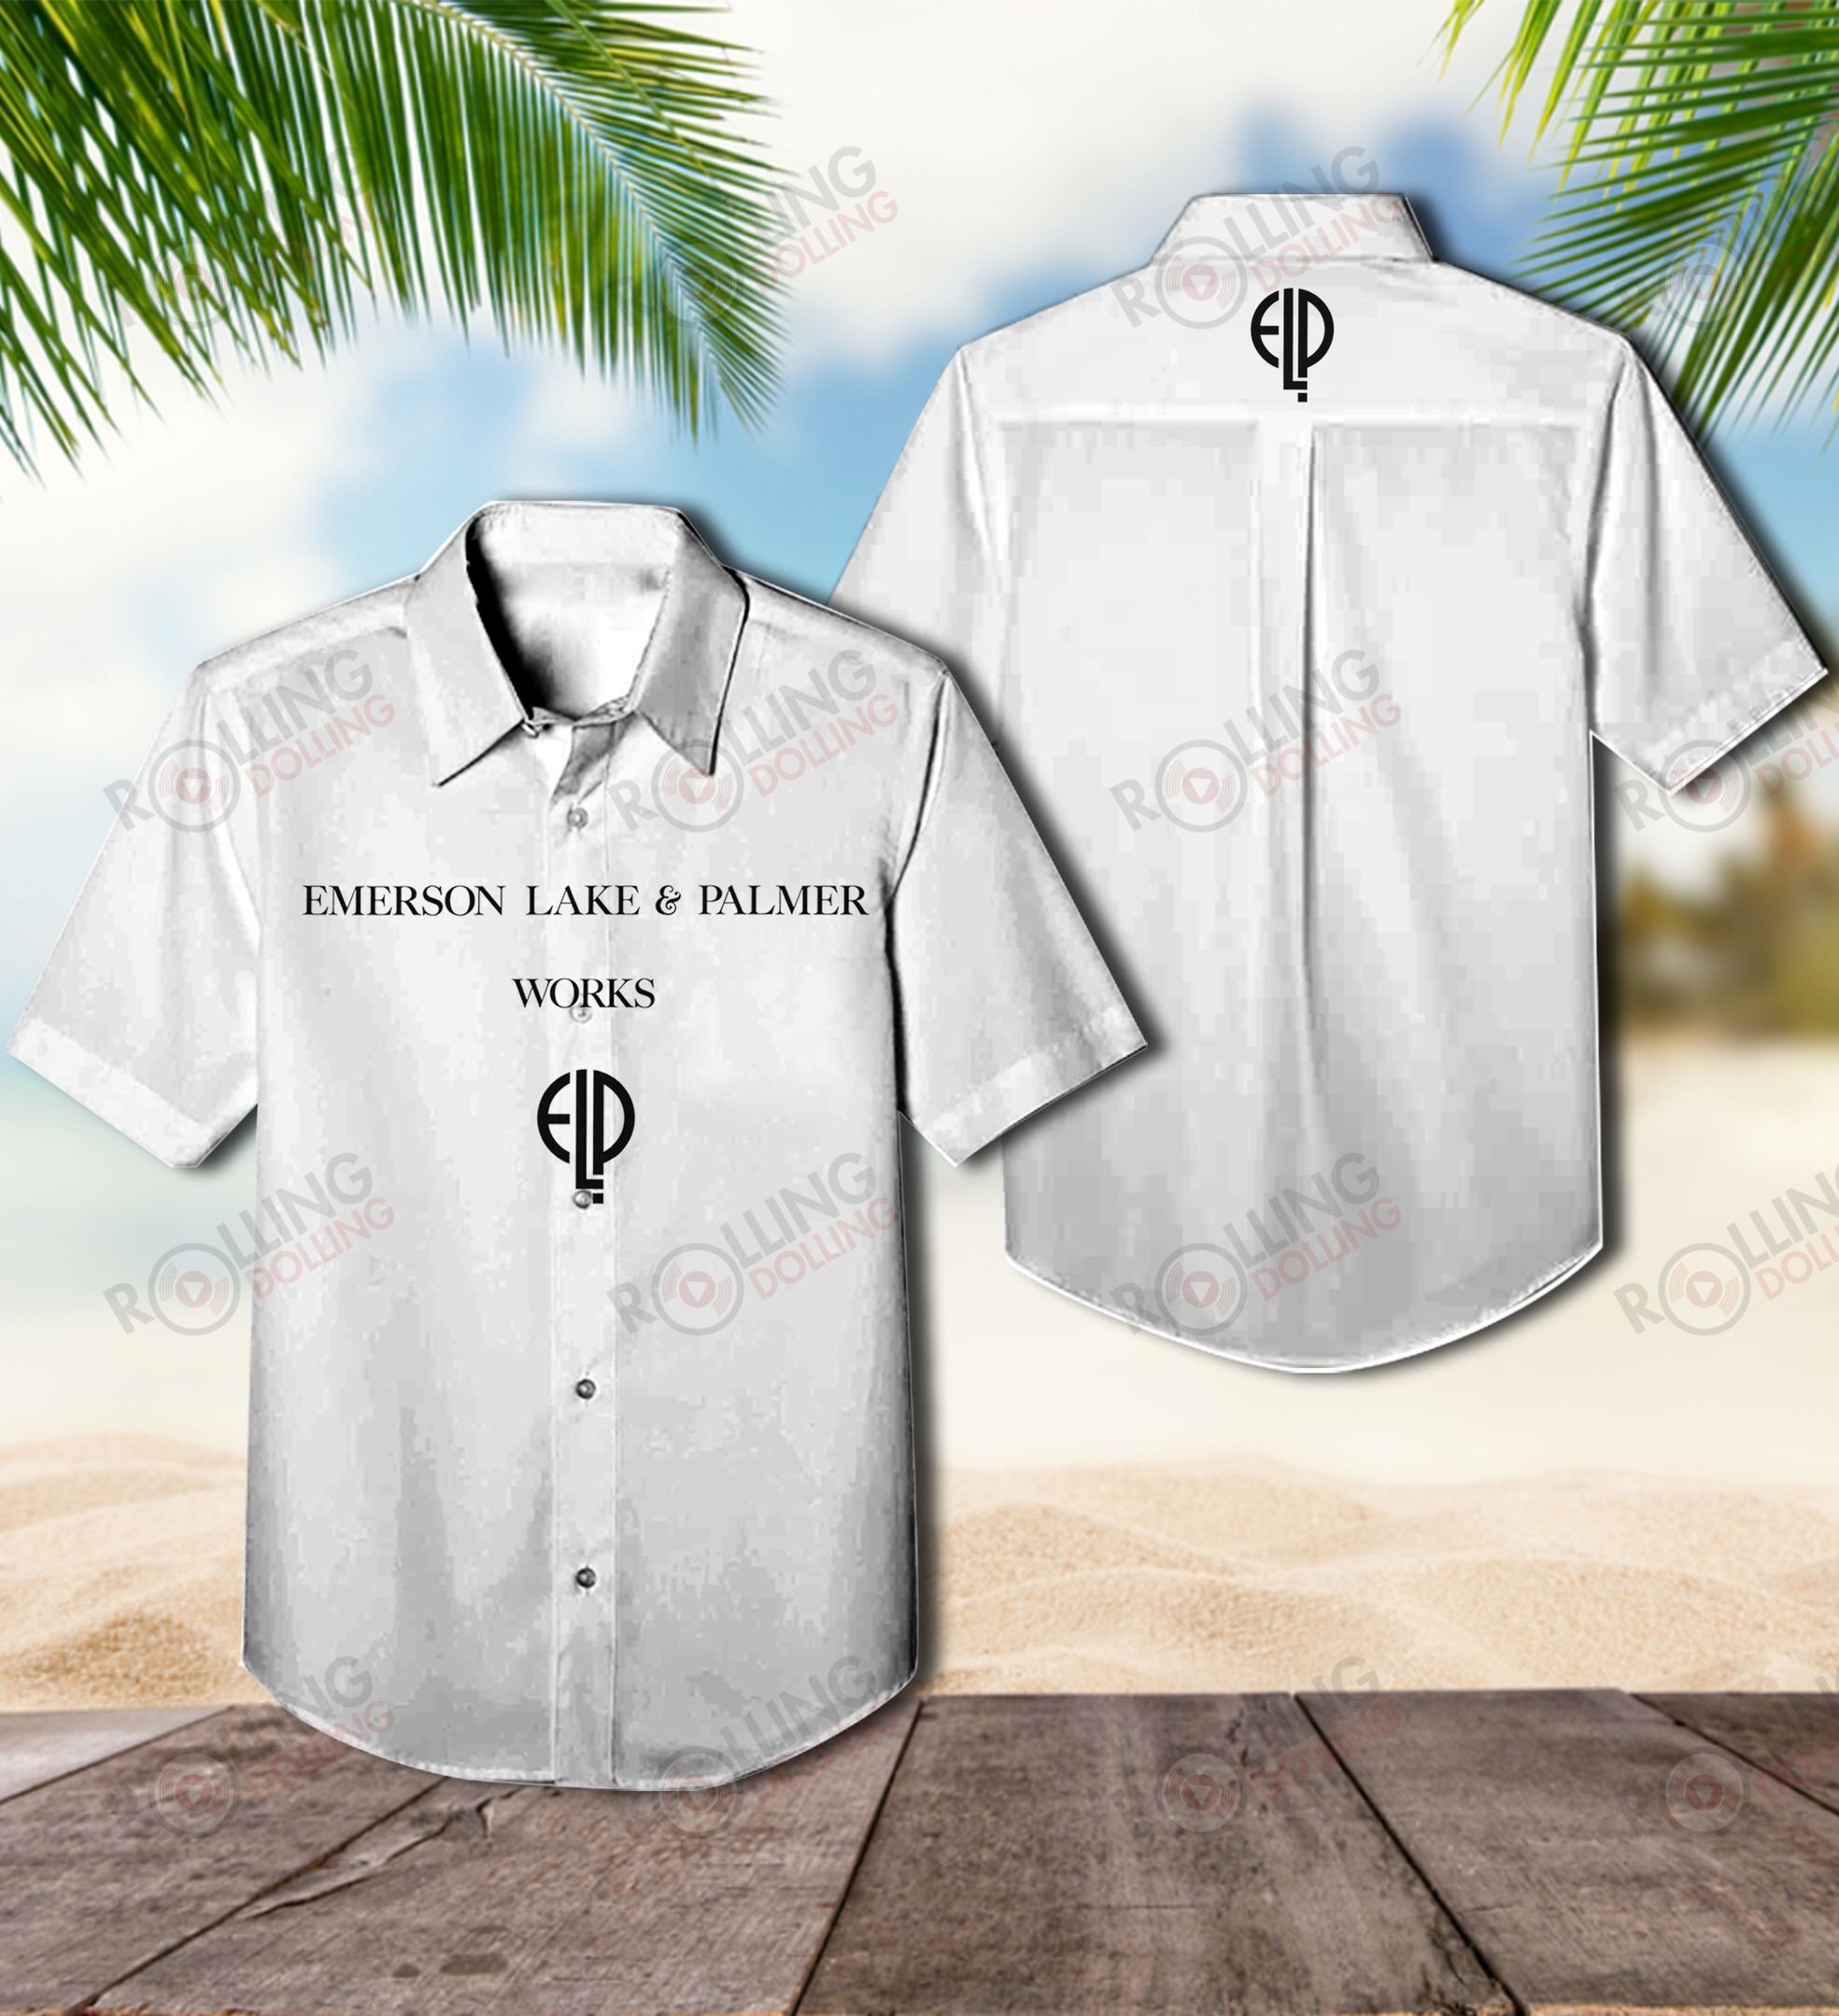 This would make a great gift for any fan who loves Hawaiian Shirt as well as Rock band 51